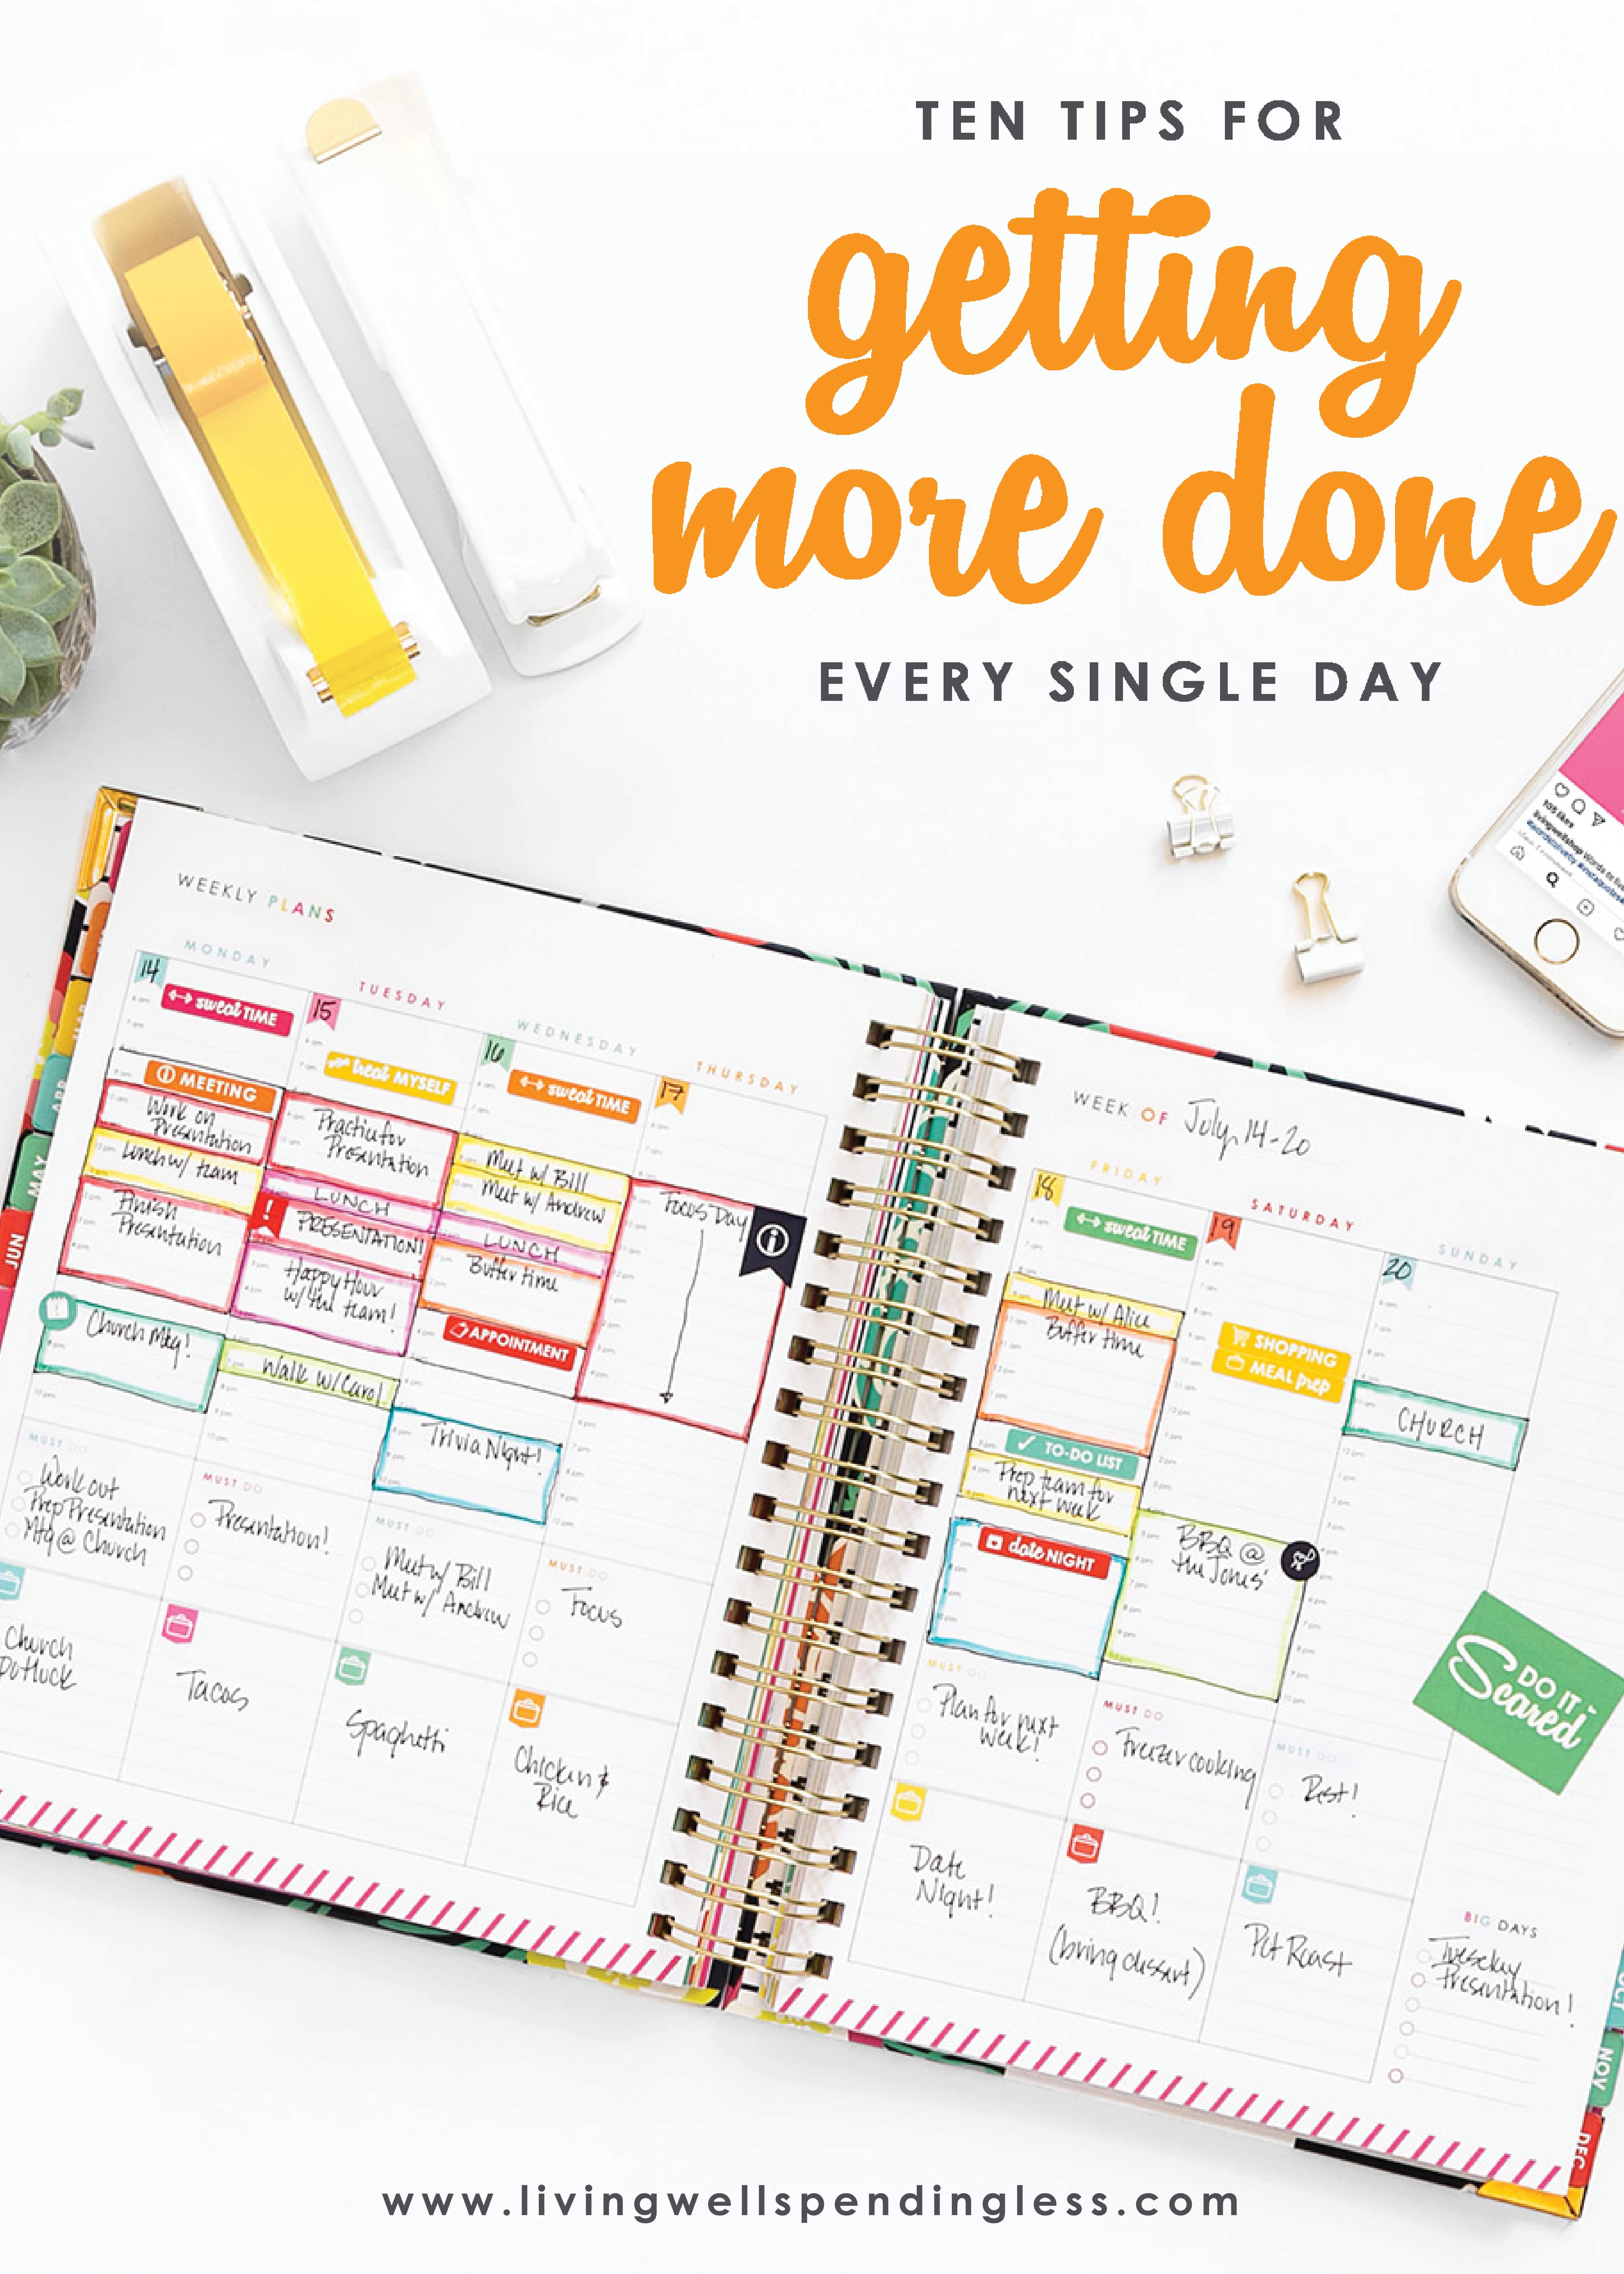 Ever feel like you are falling behind on your to-do list before you even begin? Don't miss these 10 great tips for getting more done every single day!